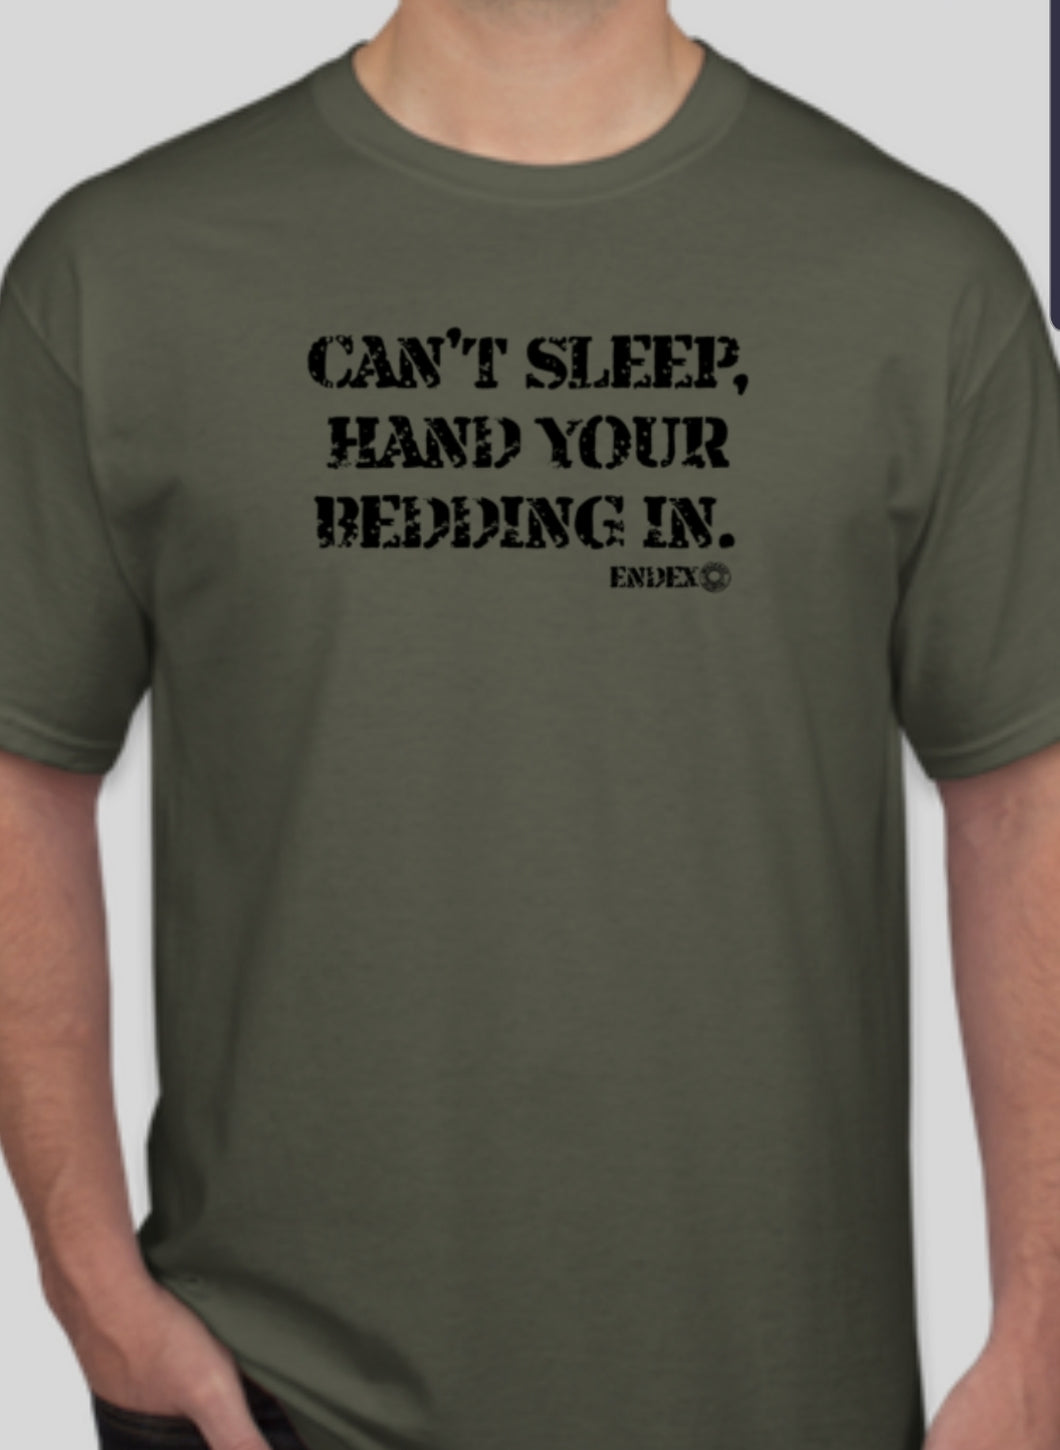 Military Humor - ENDEX - Bedding In! - Military Humor Stores